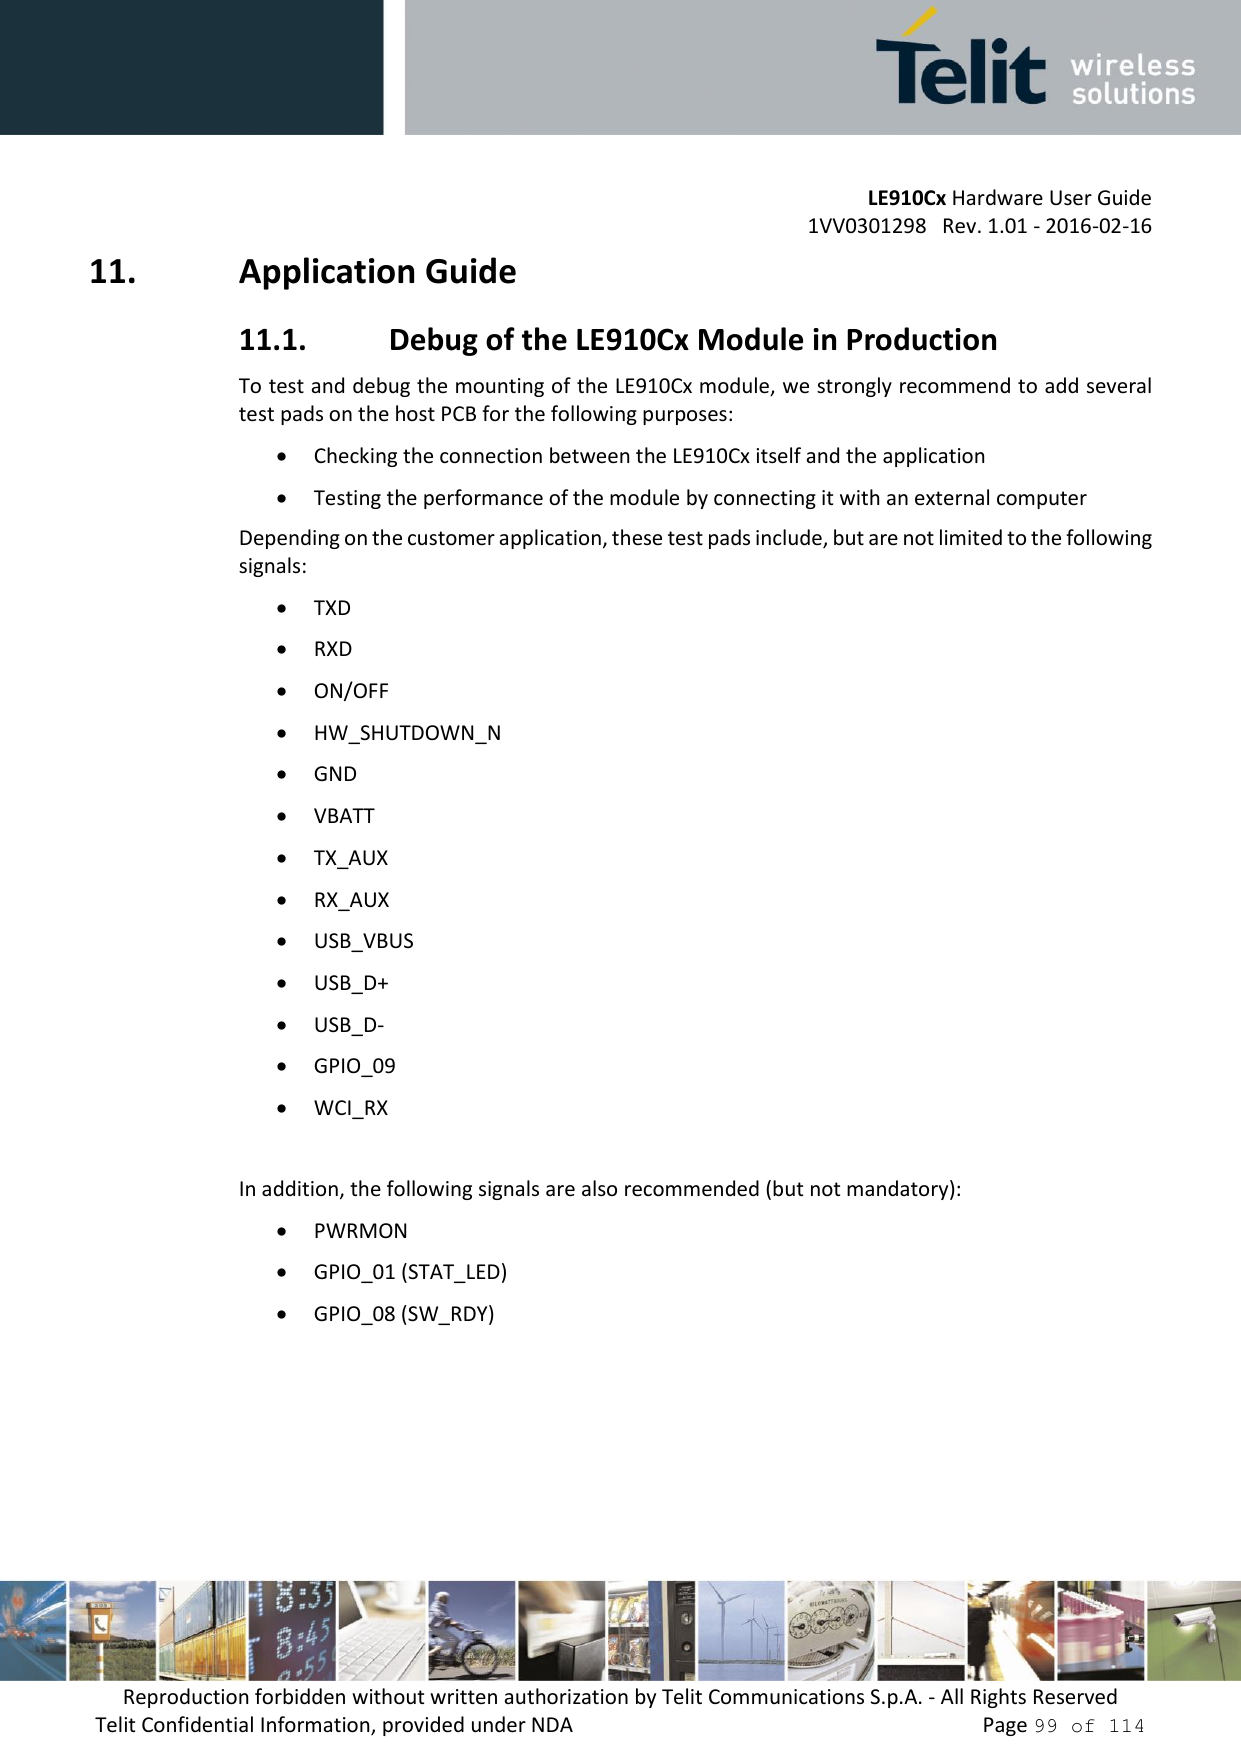 LE910Cx Hardware User Guide 1VV0301298   Rev. 1.01 - 2016-02-16 Reproduction forbidden without written authorization by Telit Communications S.p.A. - All Rights Reserved Telit Confidential Information, provided under NDA   Page 99 of 114 11. Application Guide11.1. Debug of the LE910Cx Module in ProductionTo test and debug the mounting of the LE910Cx module, we strongly recommend to add severaltest pads on the host PCB for the following purposes:Checking the connection between the LE910Cx itself and the applicationTesting the performance of the module by connecting it with an external computerDepending on the customer application, these test pads include, but are not limited to the following signals: TXDRXDON/OFFHW_SHUTDOWN_NGNDVBATTTX_AUXRX_AUXUSB_VBUSUSB_D+USB_D-GPIO_09WCI_RXIn addition, the following signals are also recommended (but not mandatory): PWRMONGPIO_01 (STAT_LED)GPIO_08 (SW_RDY)